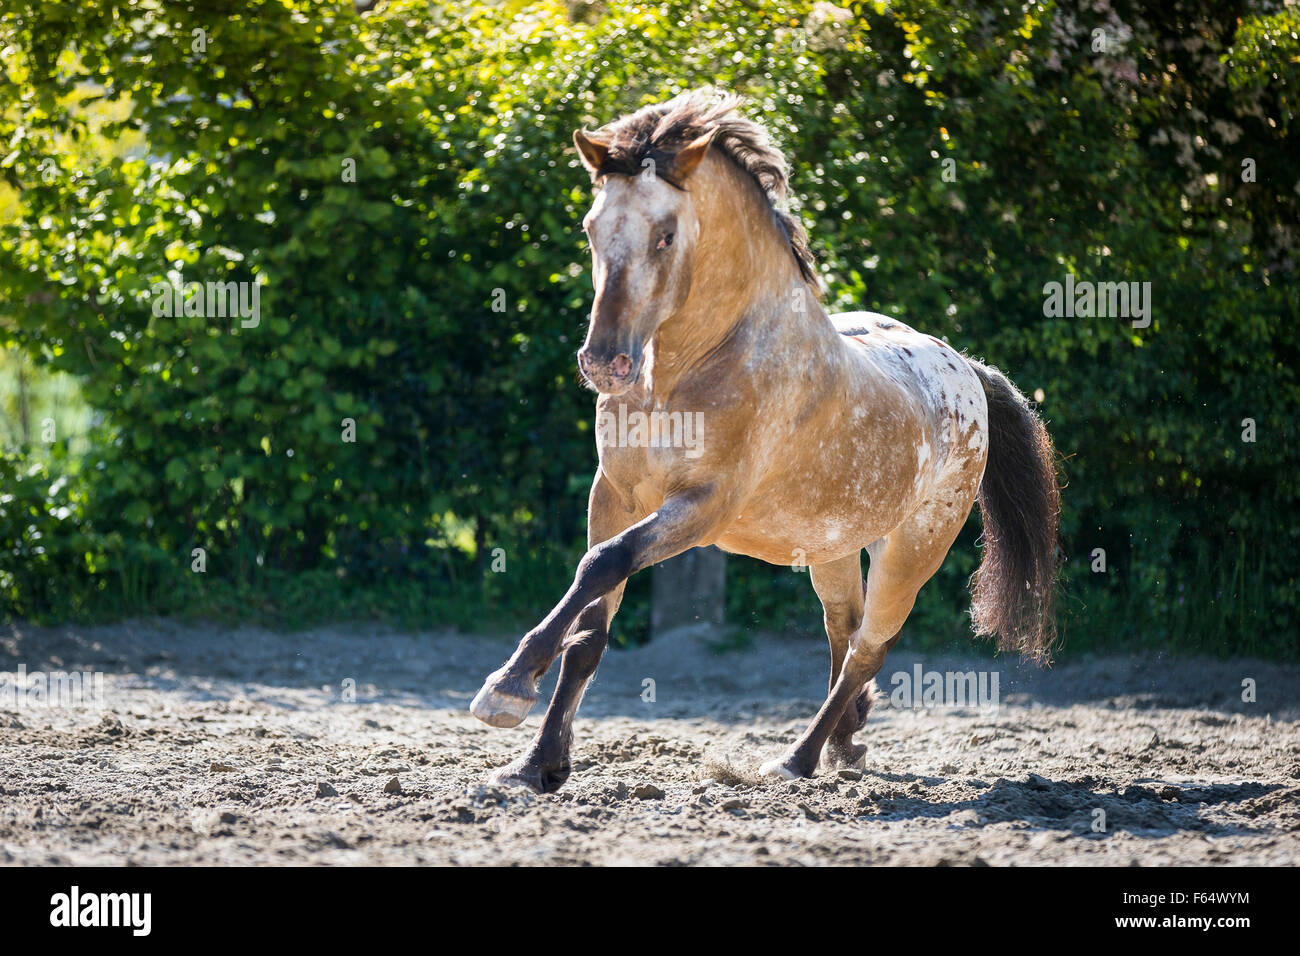 Appaloosa Horse Gallop High Resolution Stock Photography and Images - Alamy